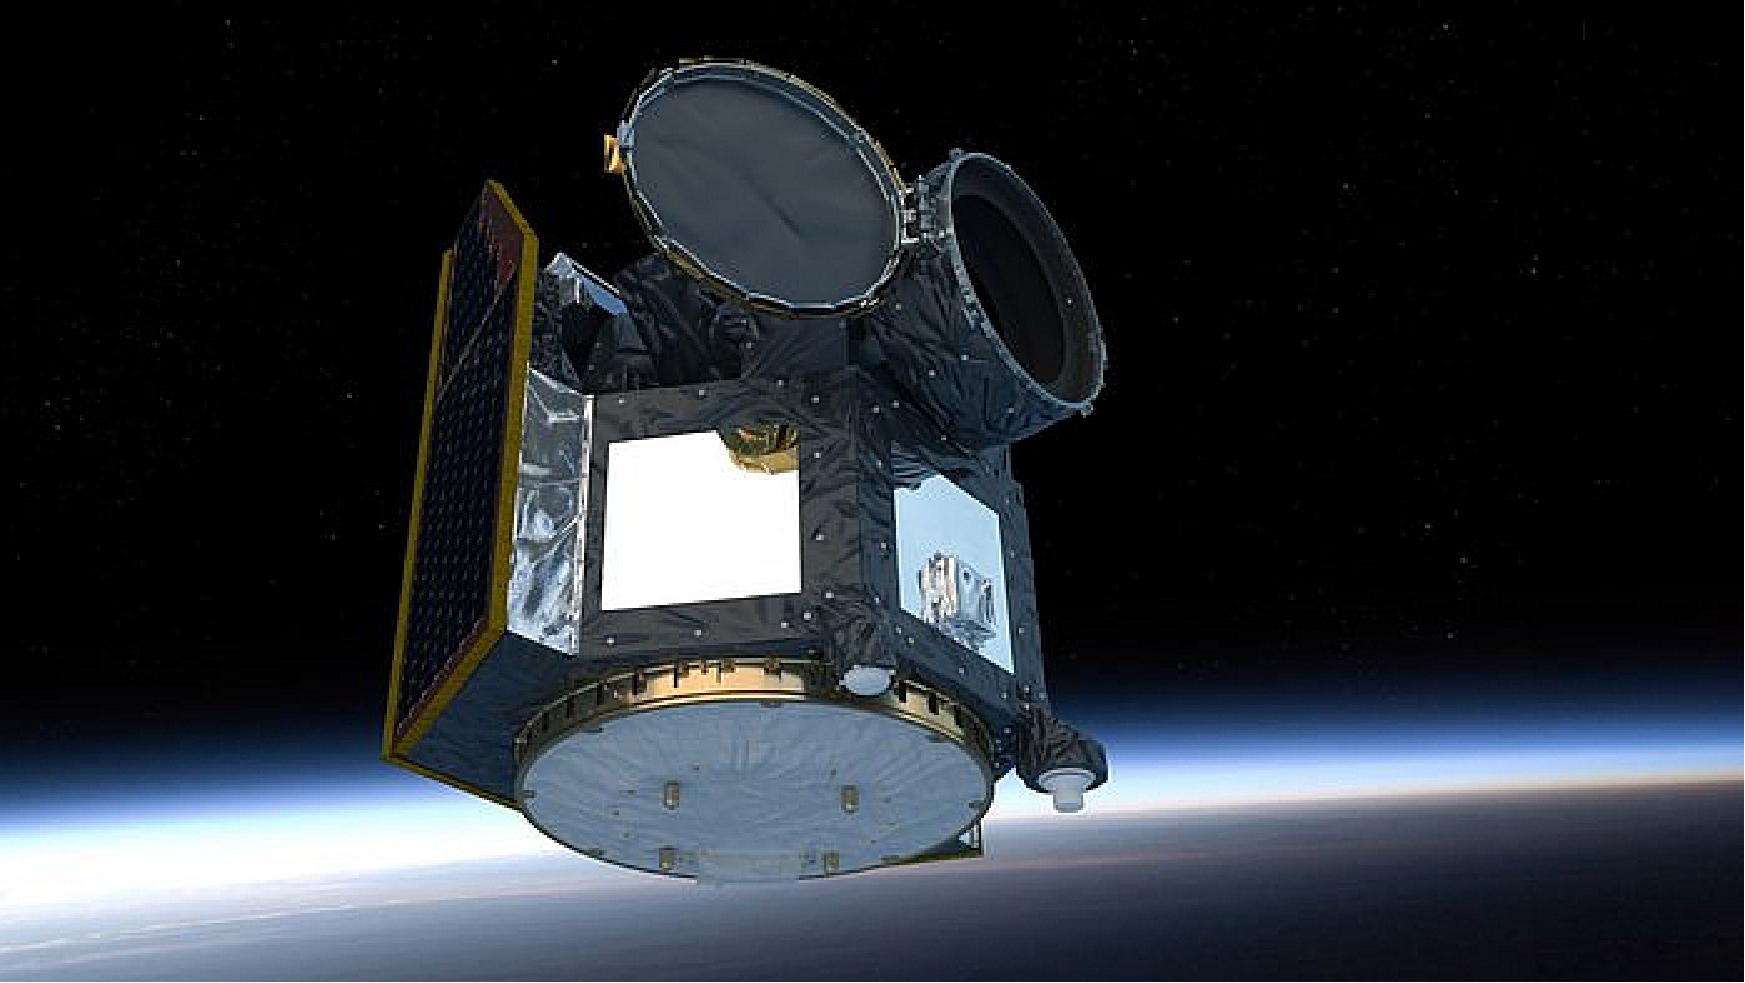 Figure 51: Artist's impression of the Cheops satellite in orbit. In this view the satellite's telescope cover is open (image credit: ESA / ATG medialab)